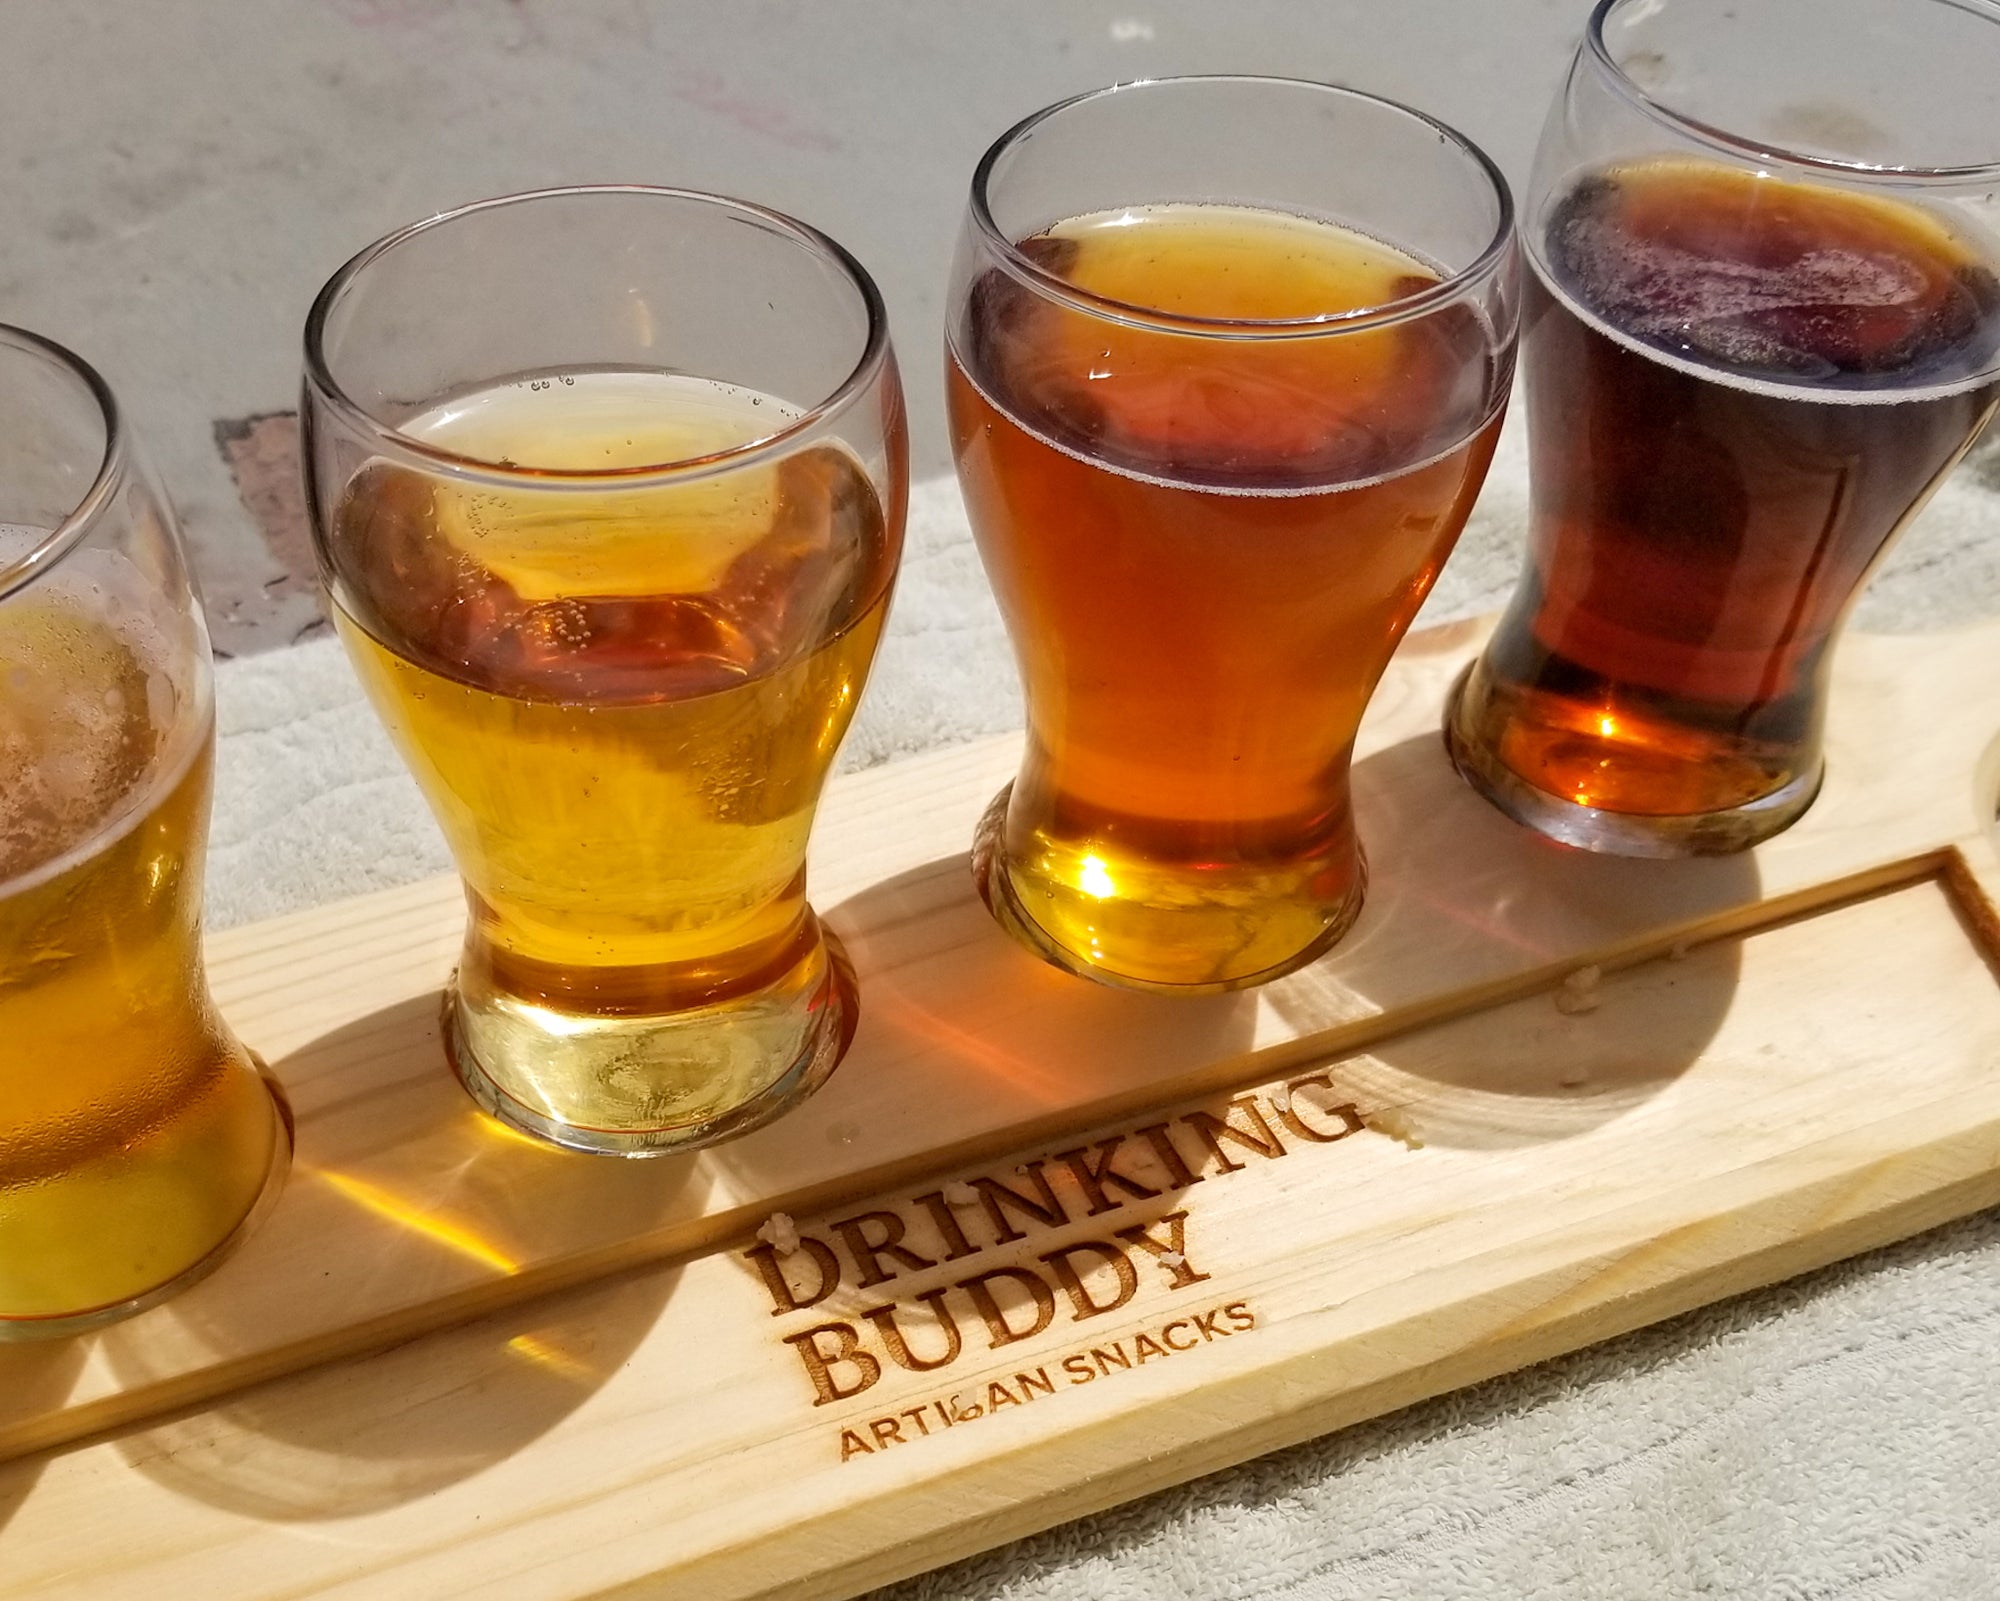 Hand-carved flight tray with Drinking Buddy logo and snack tray with tasty craft beer